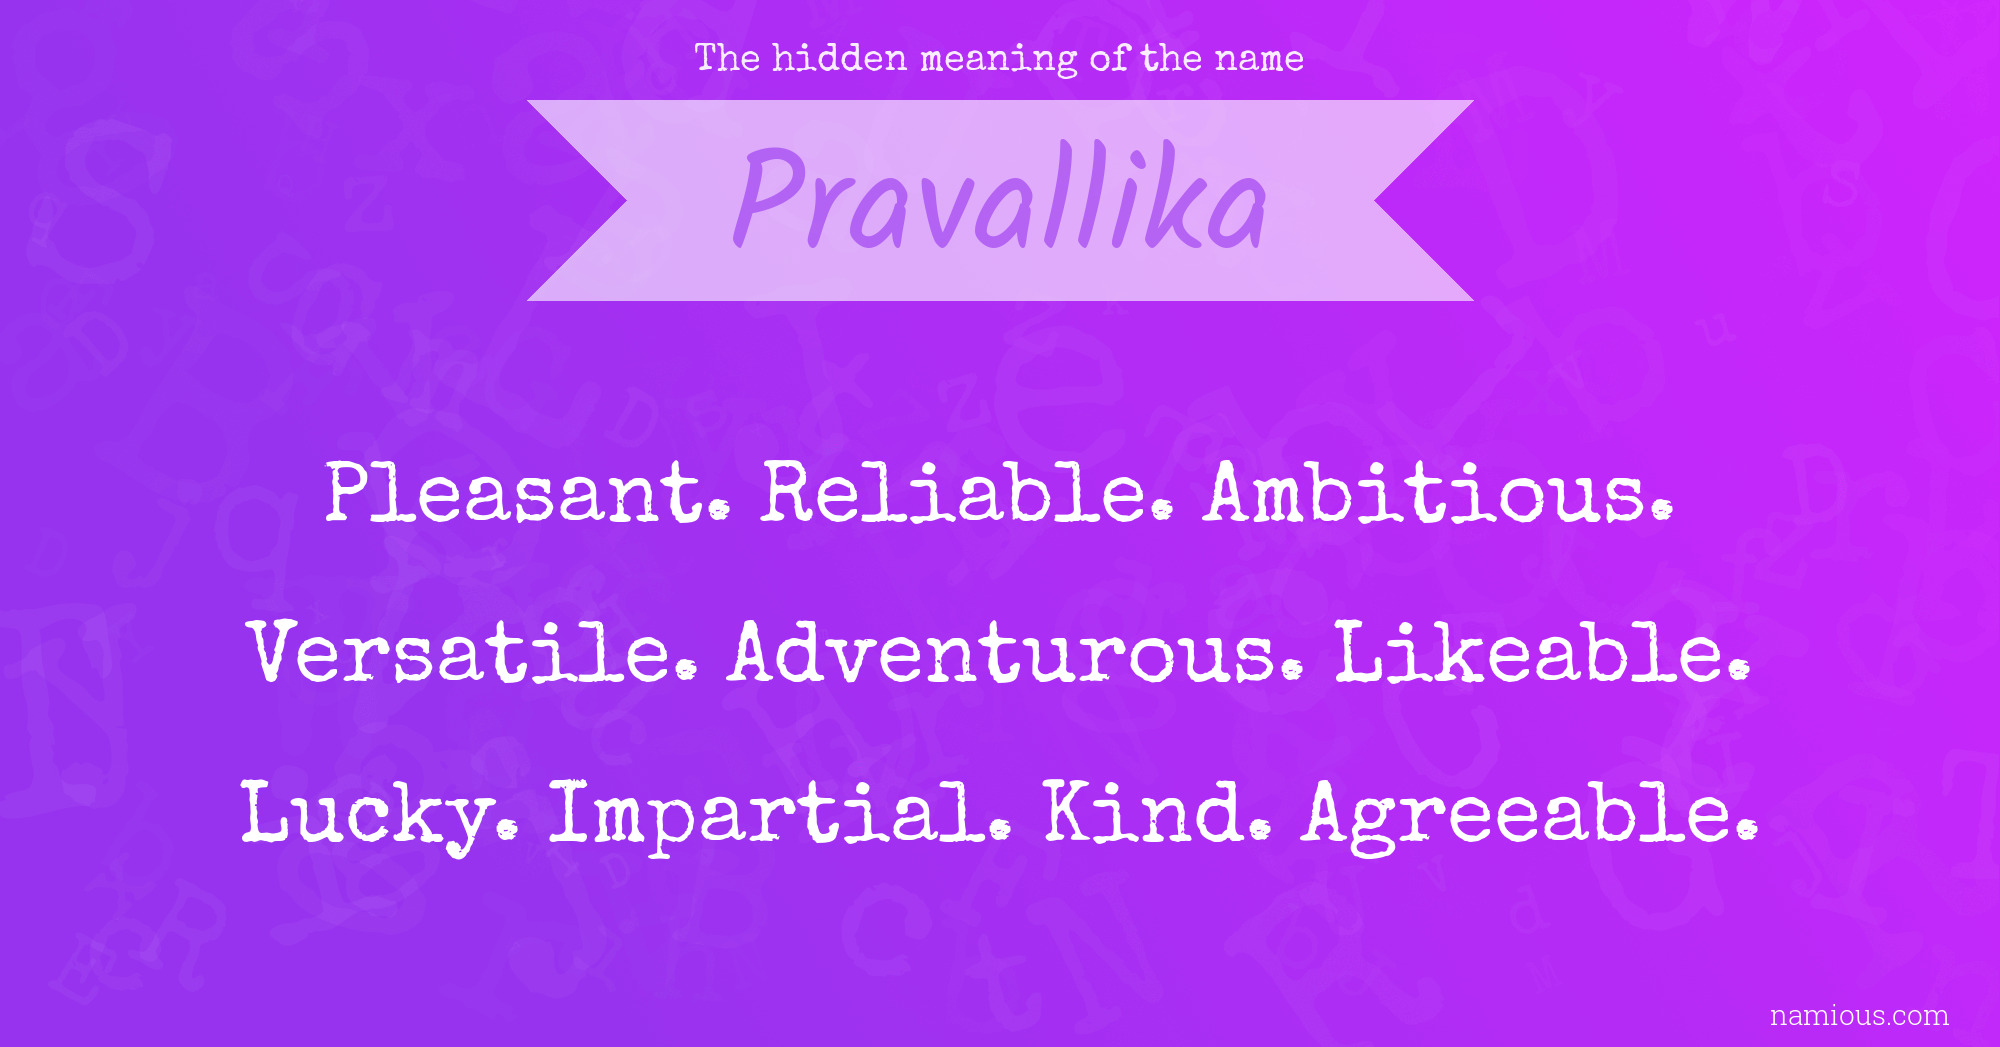 The hidden meaning of the name Pravallika